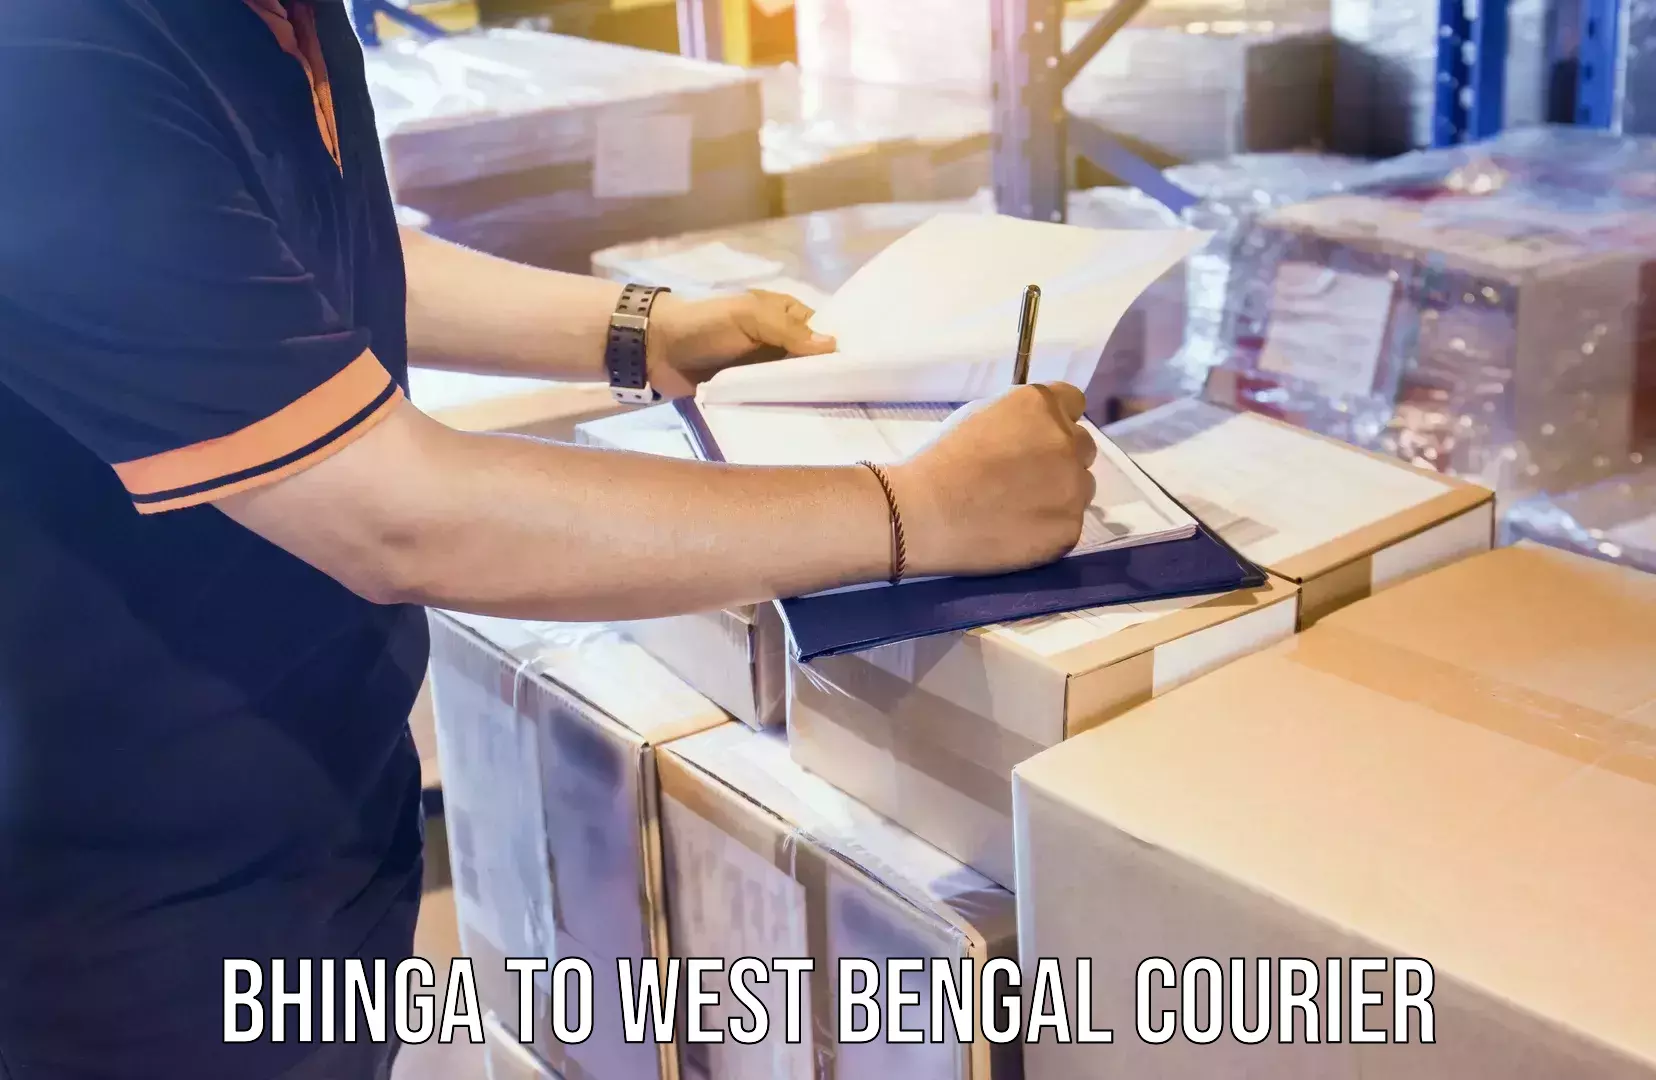 Global parcel delivery Bhinga to West Bengal